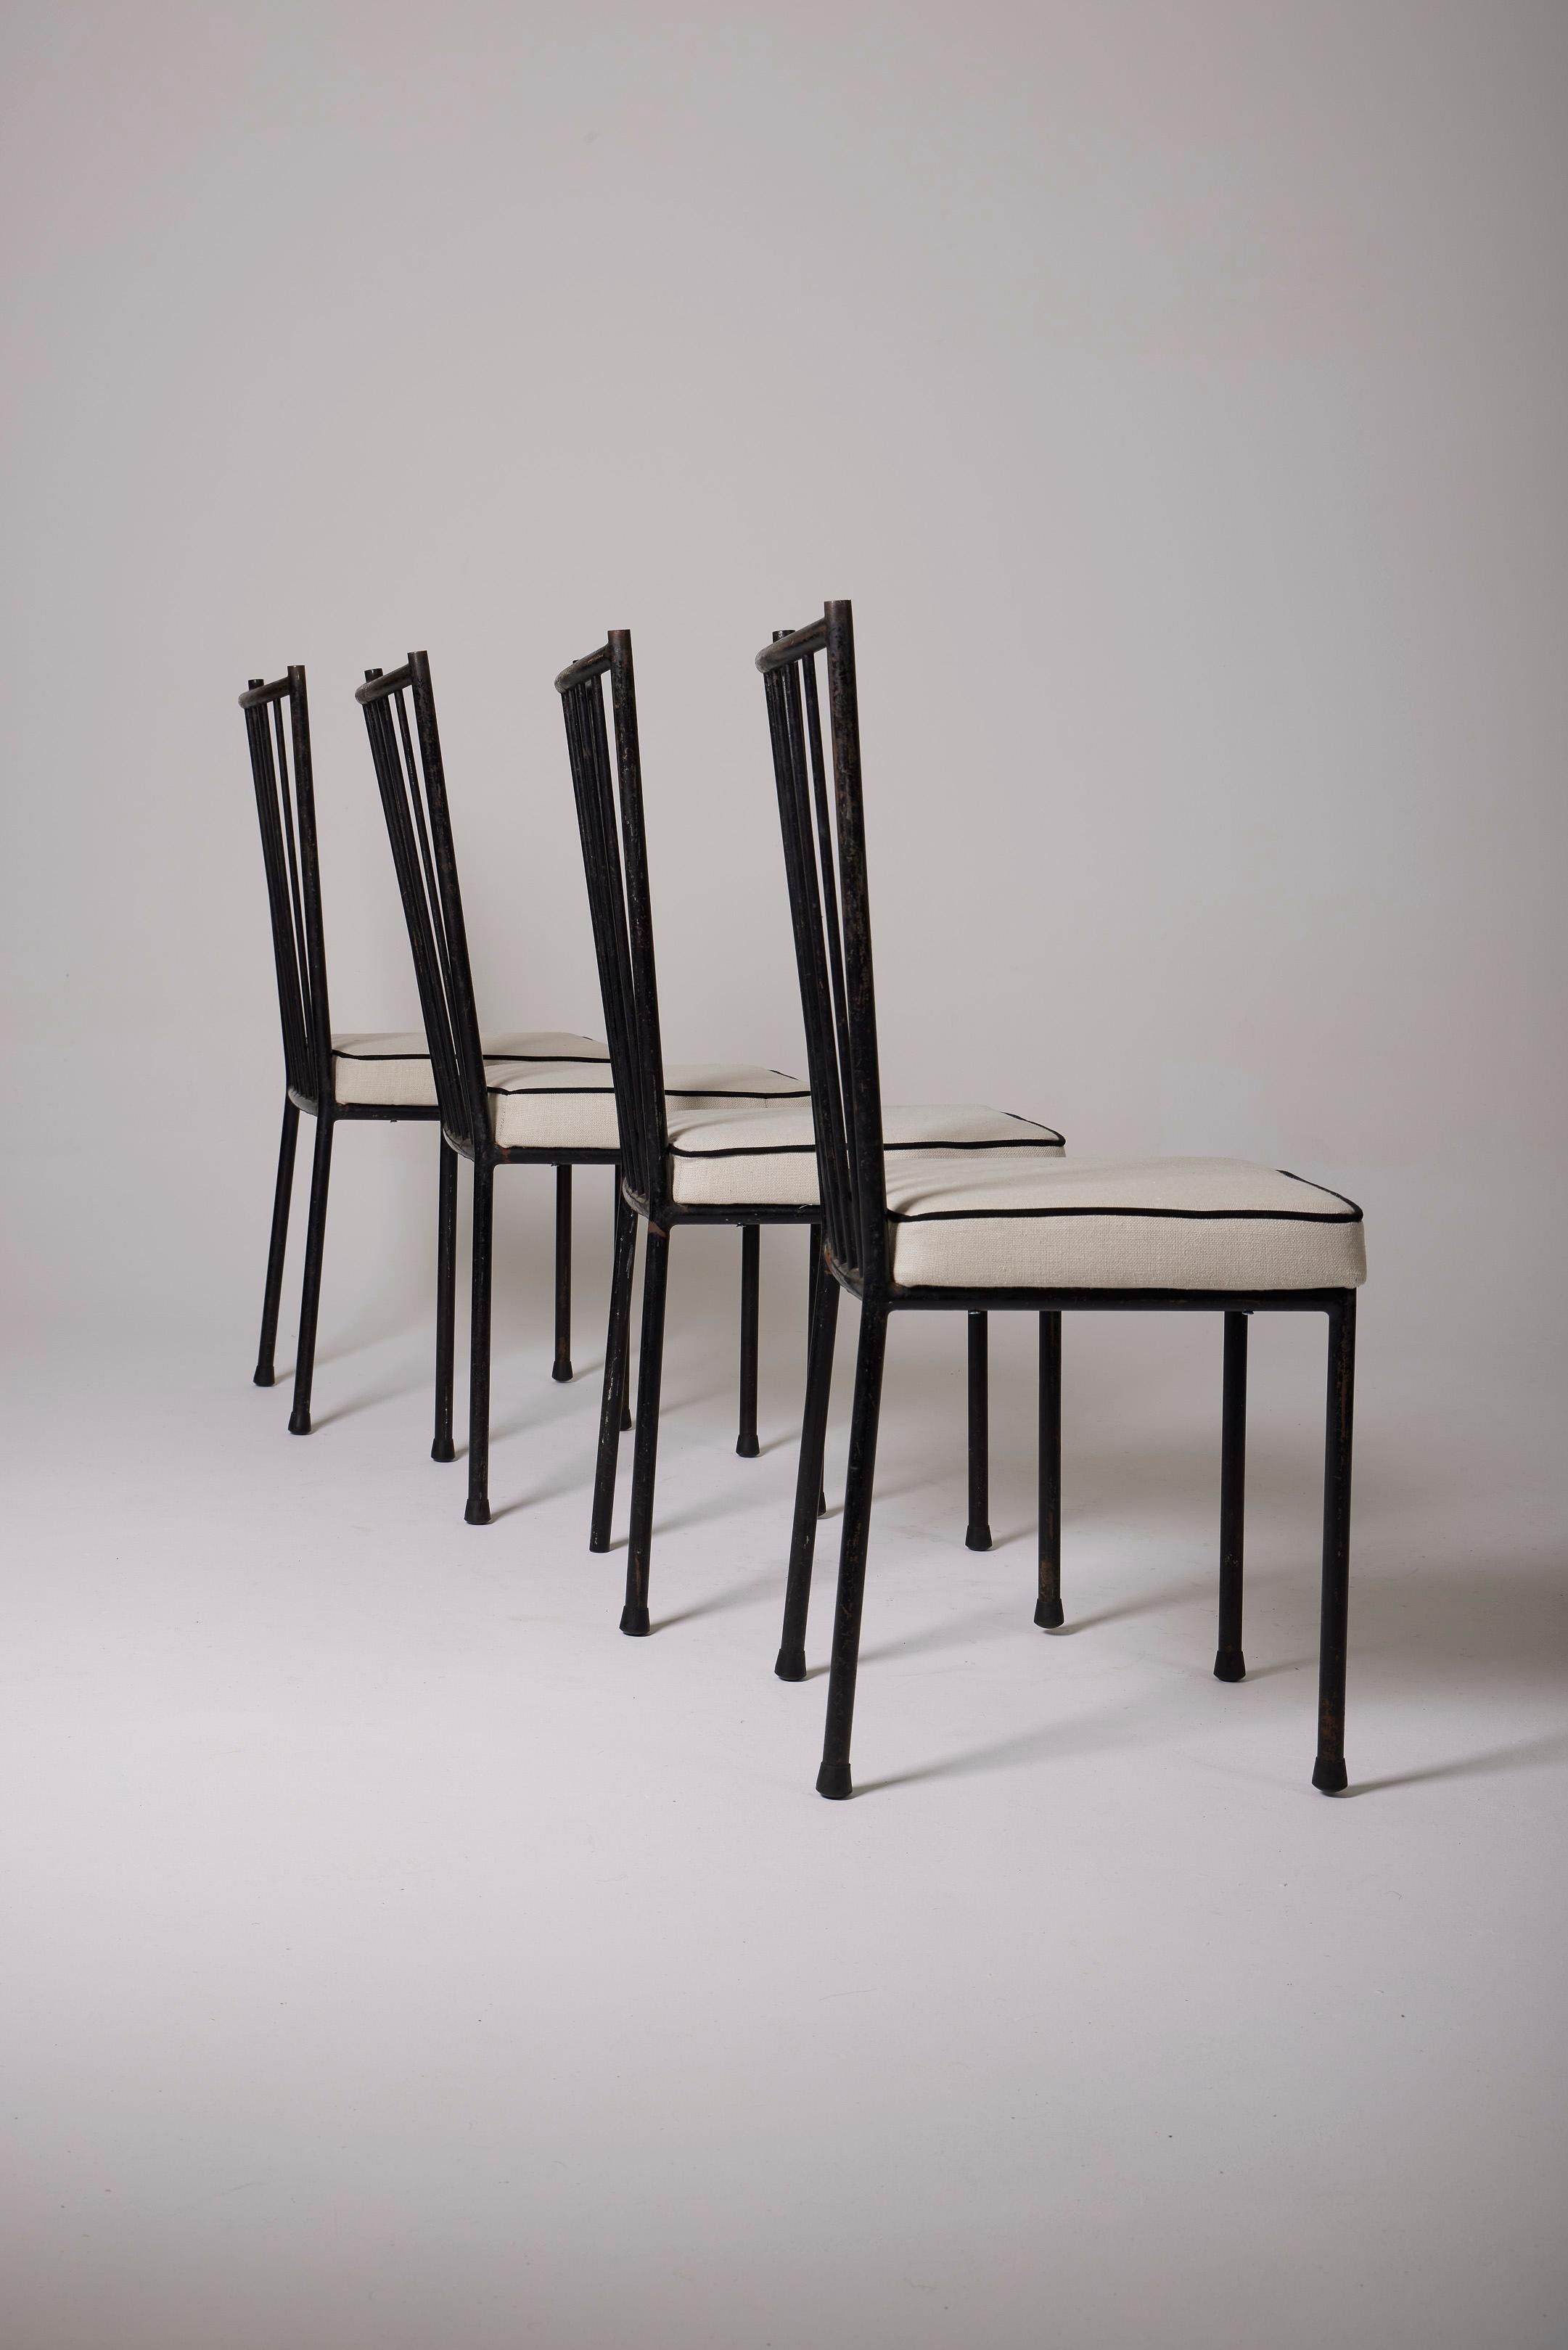  Chair by designer Colette Gueden (1905-2000) for Primavera in the 1950s (1954). The frame is in black lacquered metal and the seat is in white fabric. Signs of wear on the metal parts are to be noted (visible in the photos). Colette Gueden was a